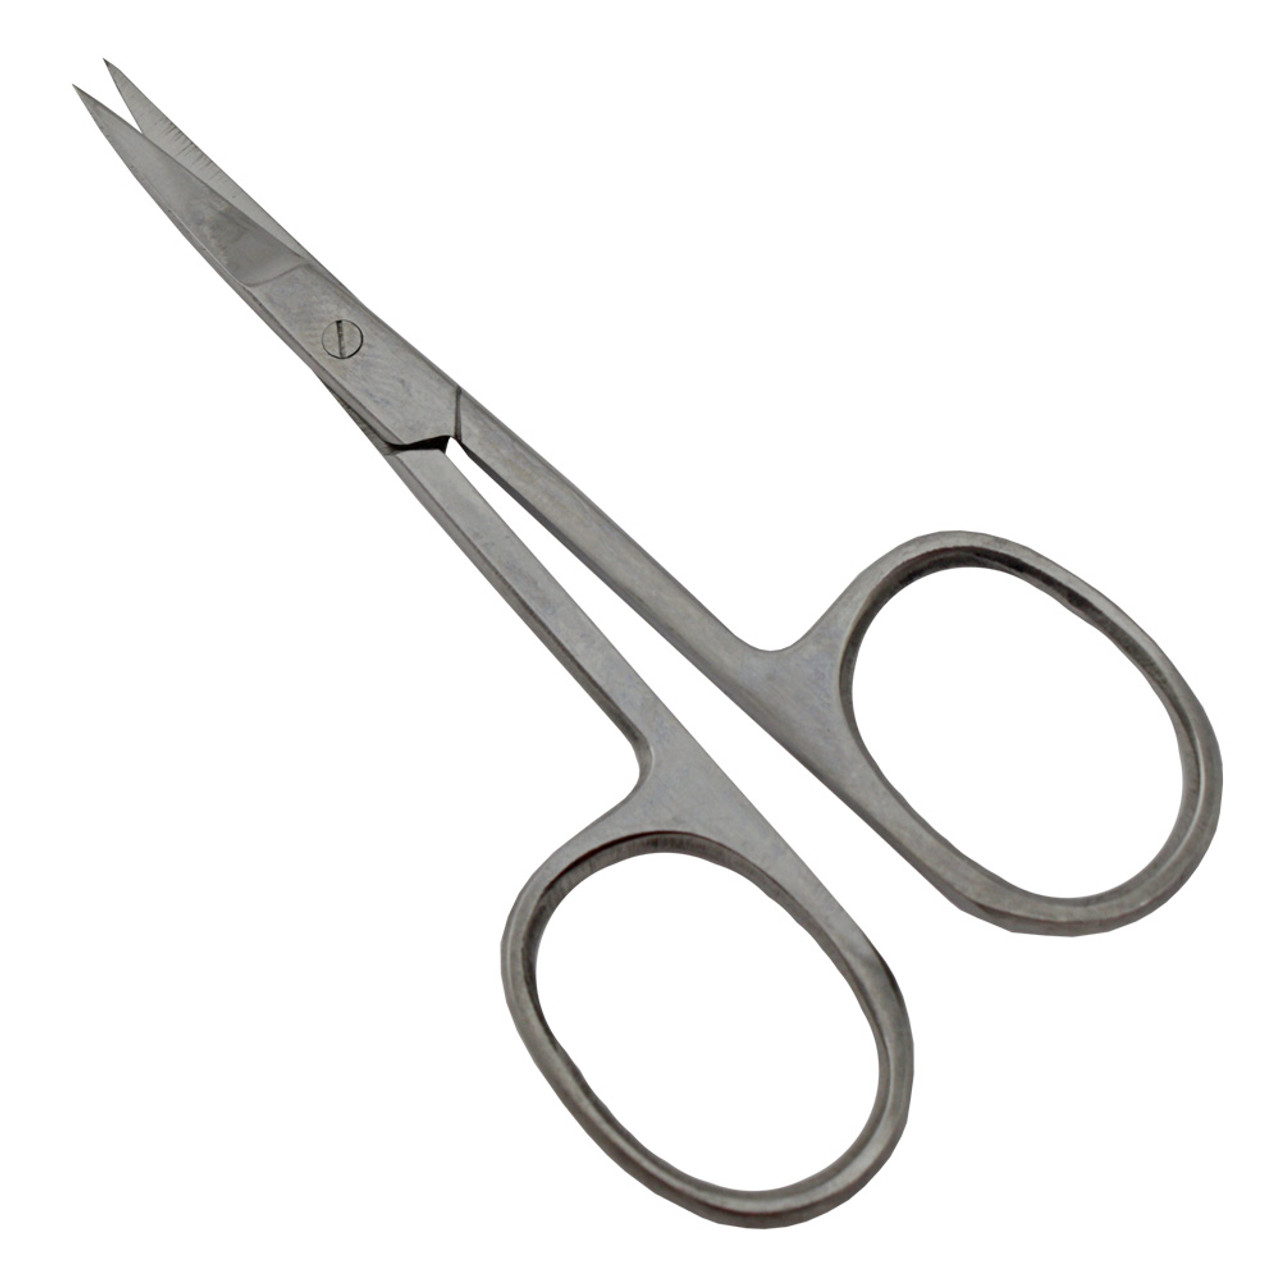 Cuticle Nipper Stainless Steel Curved Tip Thin Blade Cuticle